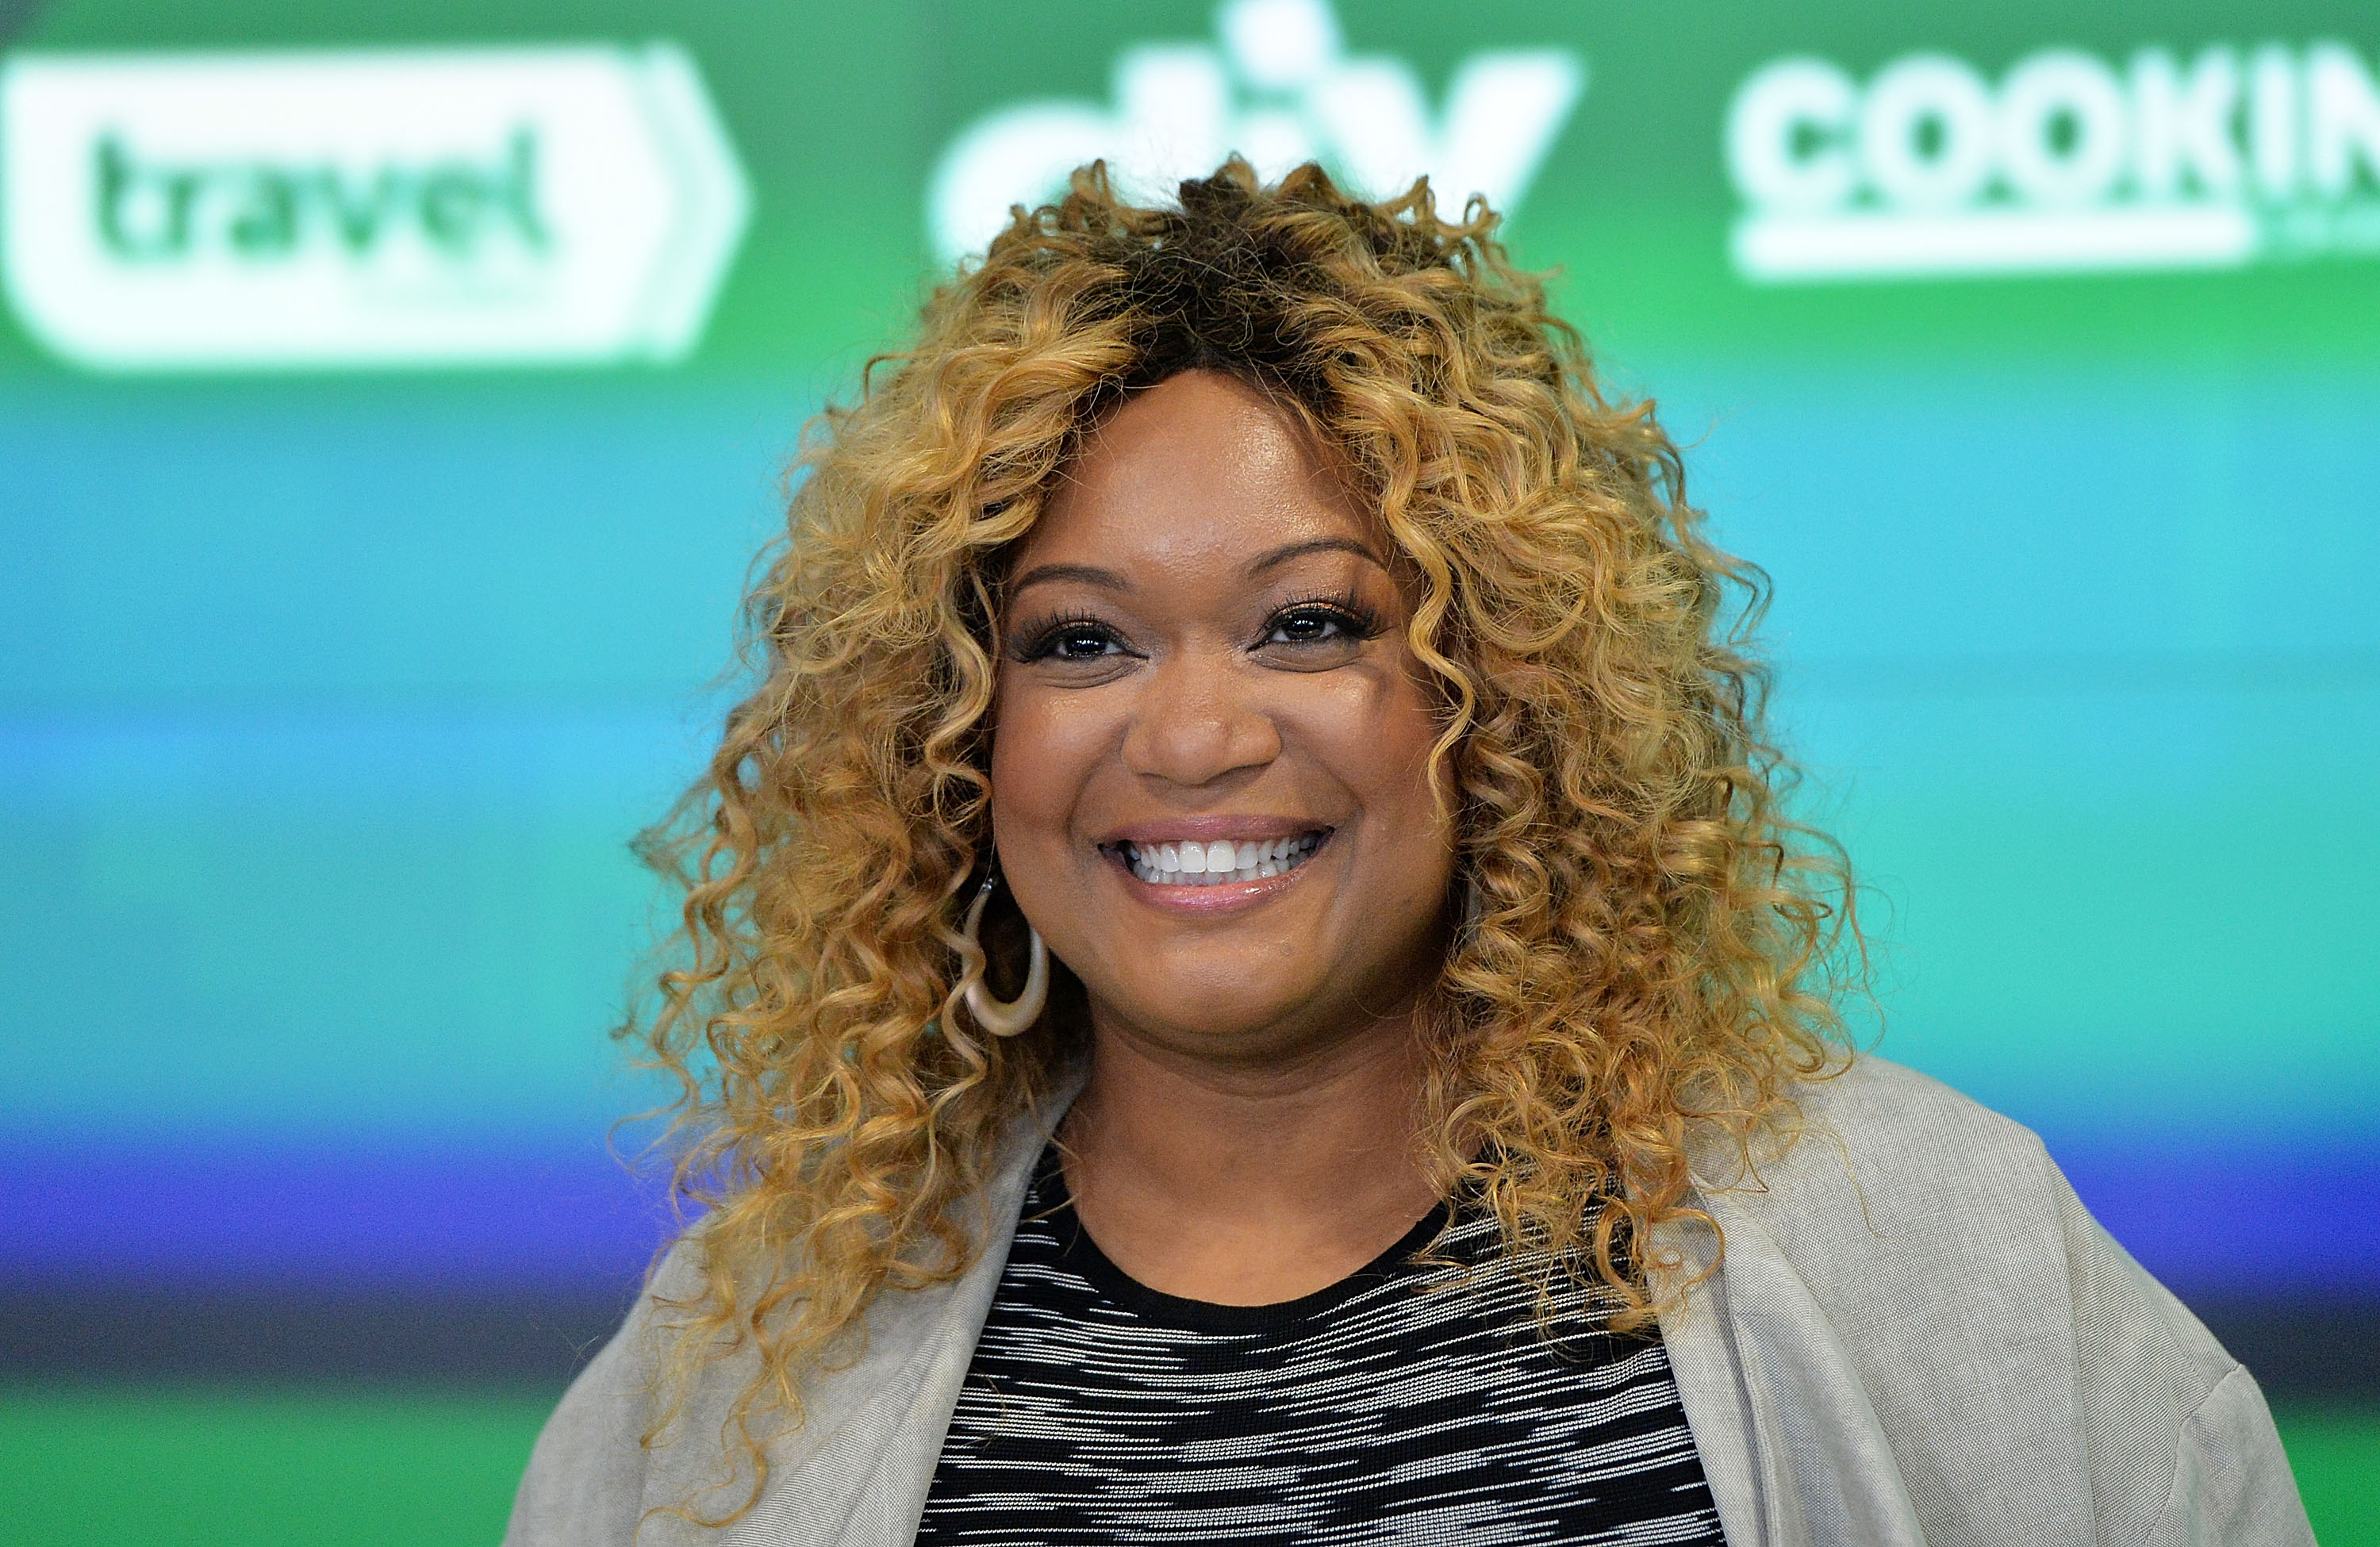 Food Network personality Sunny Anderson wears a black-and-white striped top in this photograph.